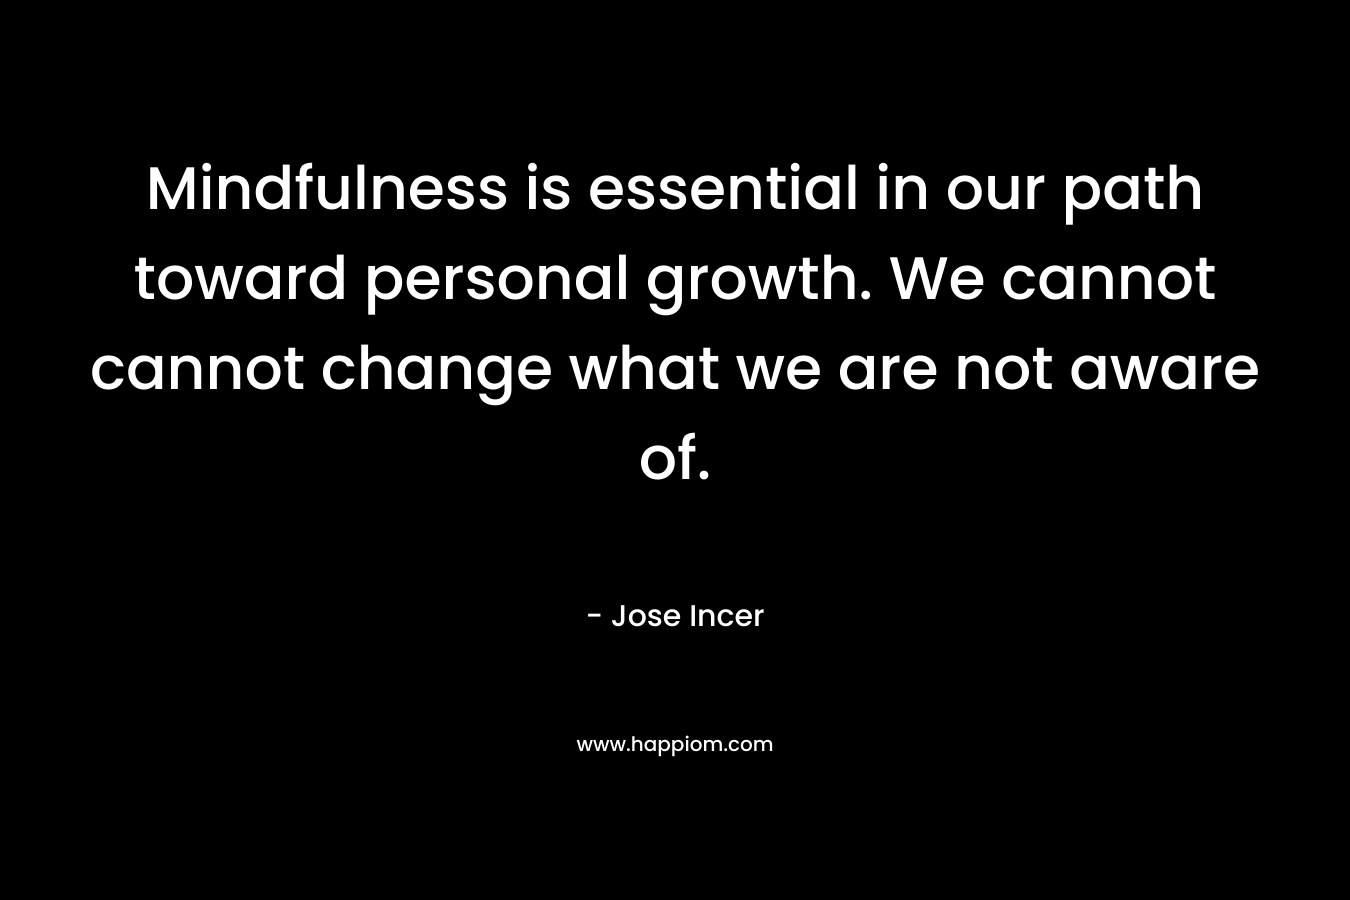 Mindfulness is essential in our path toward personal growth. We cannot cannot change what we are not aware of.